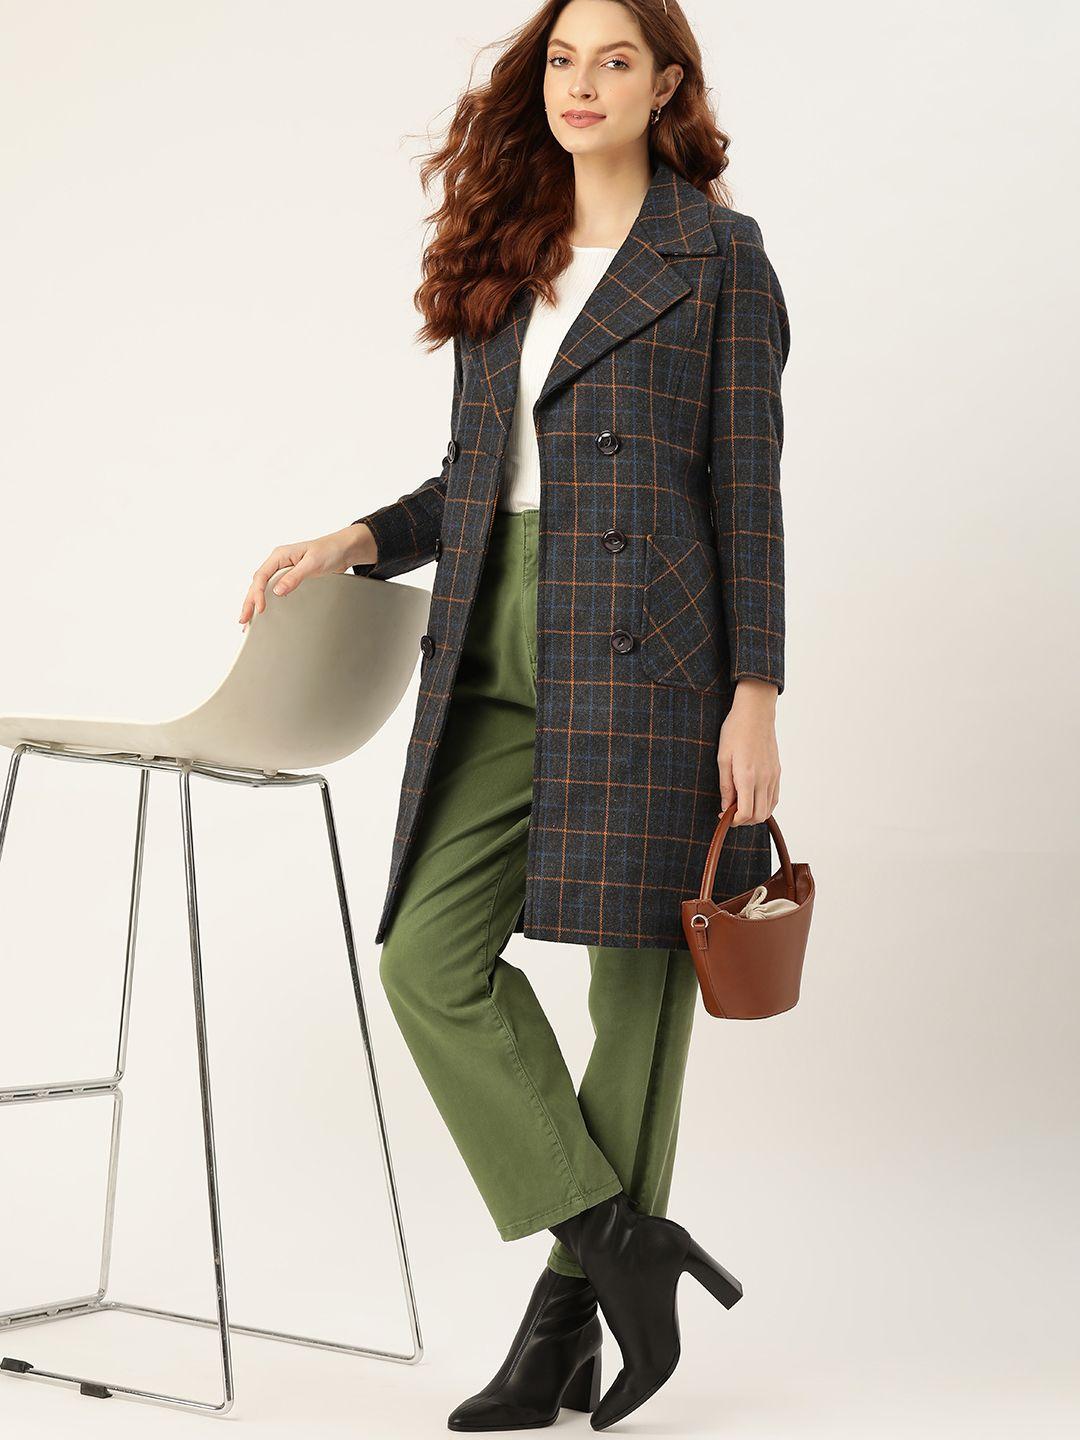 dressberry-women-charcoal-grey-&-mustard-yellow-checked-trench-coat